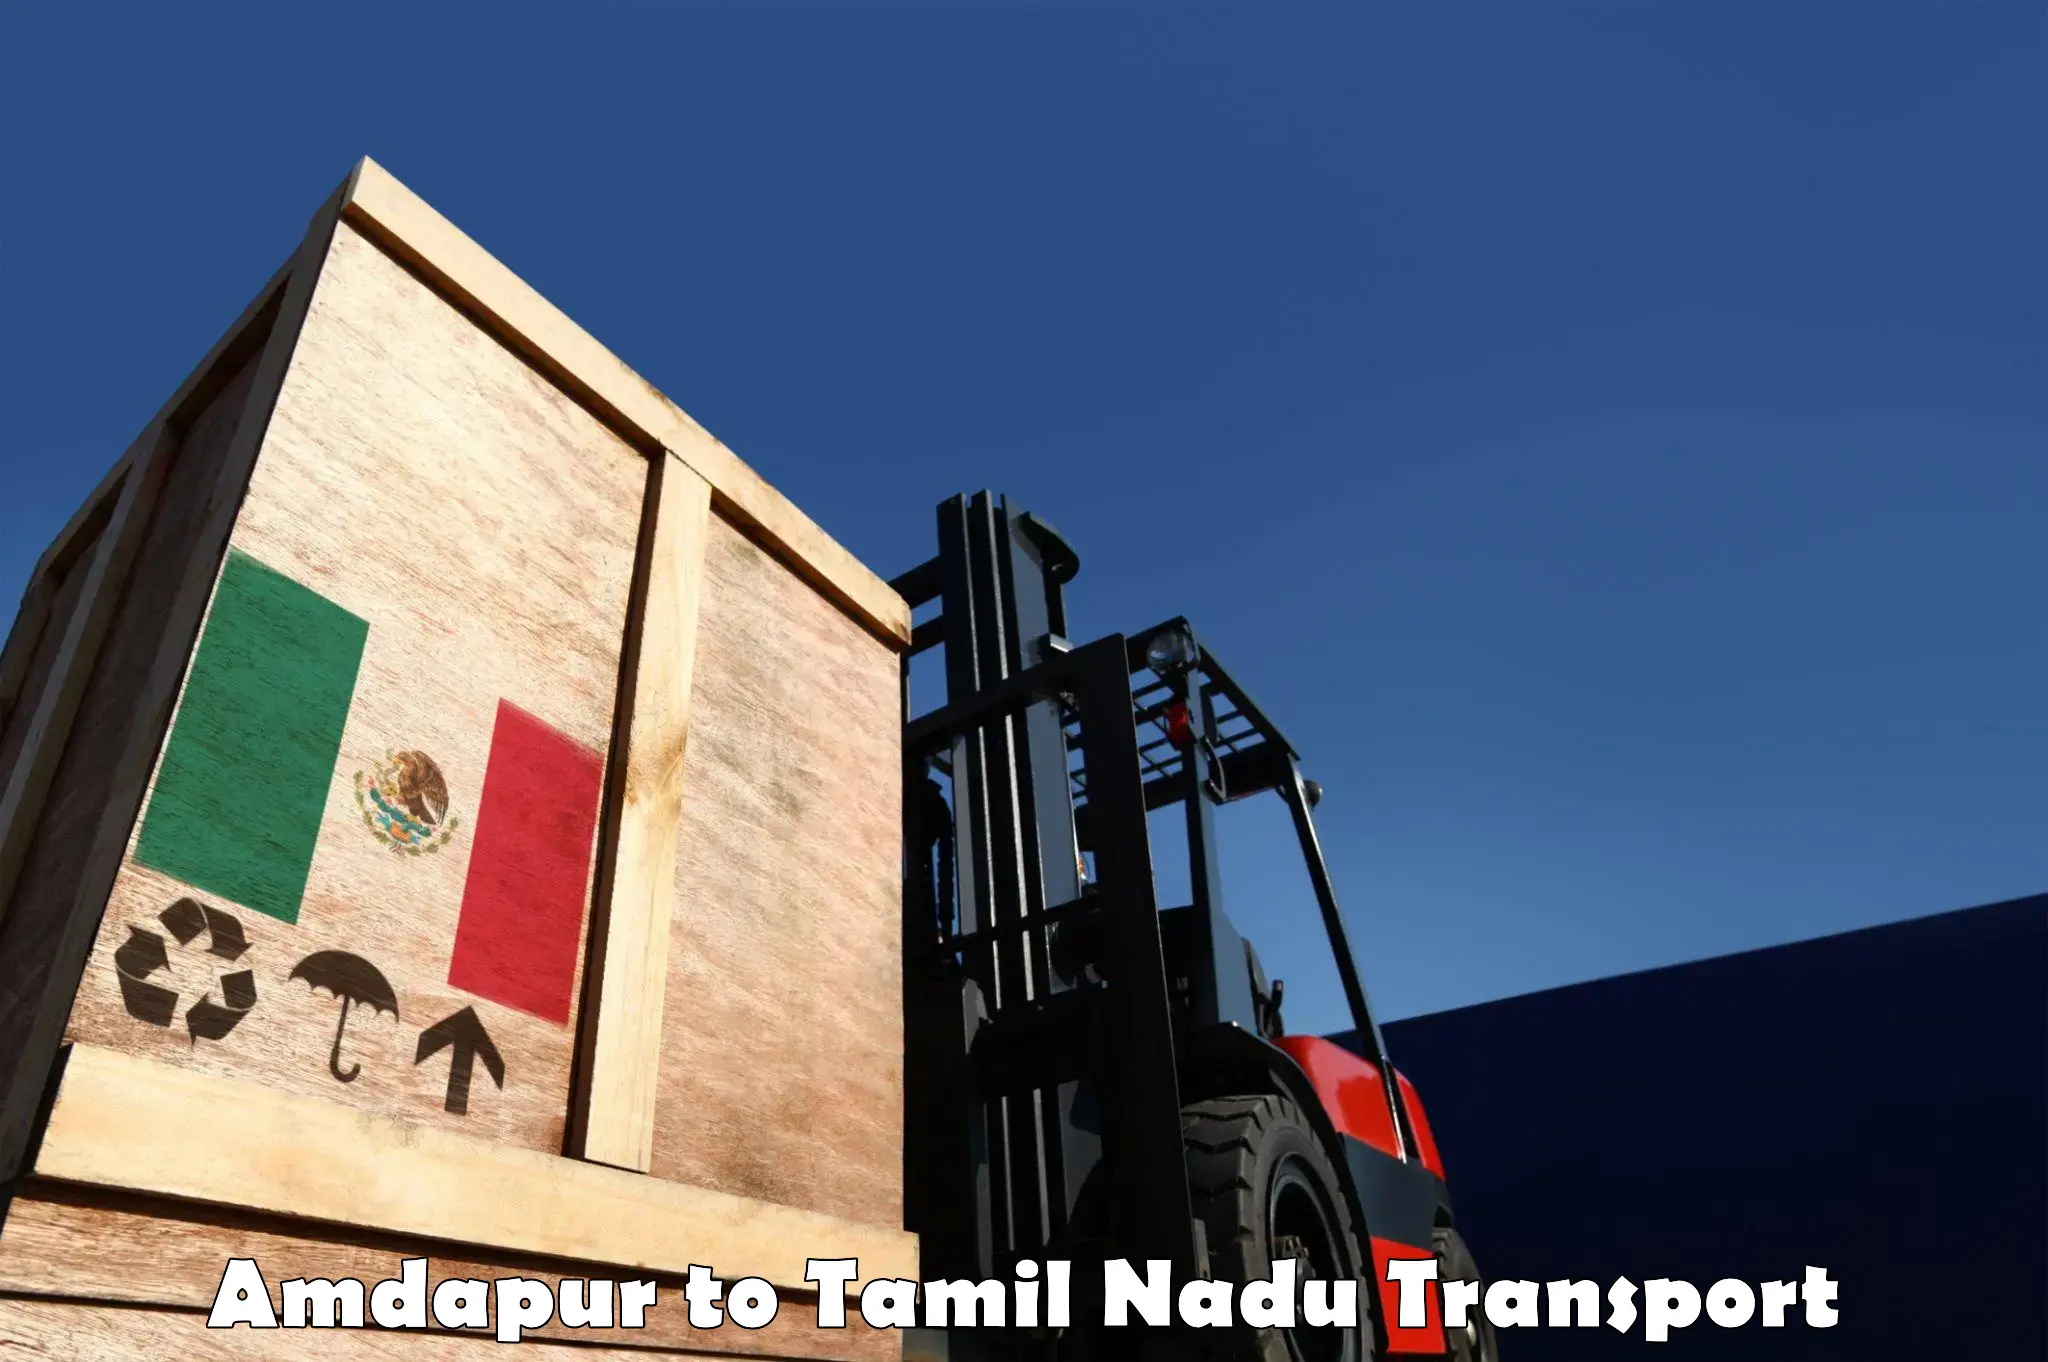 Commercial transport service Amdapur to Chennai Port